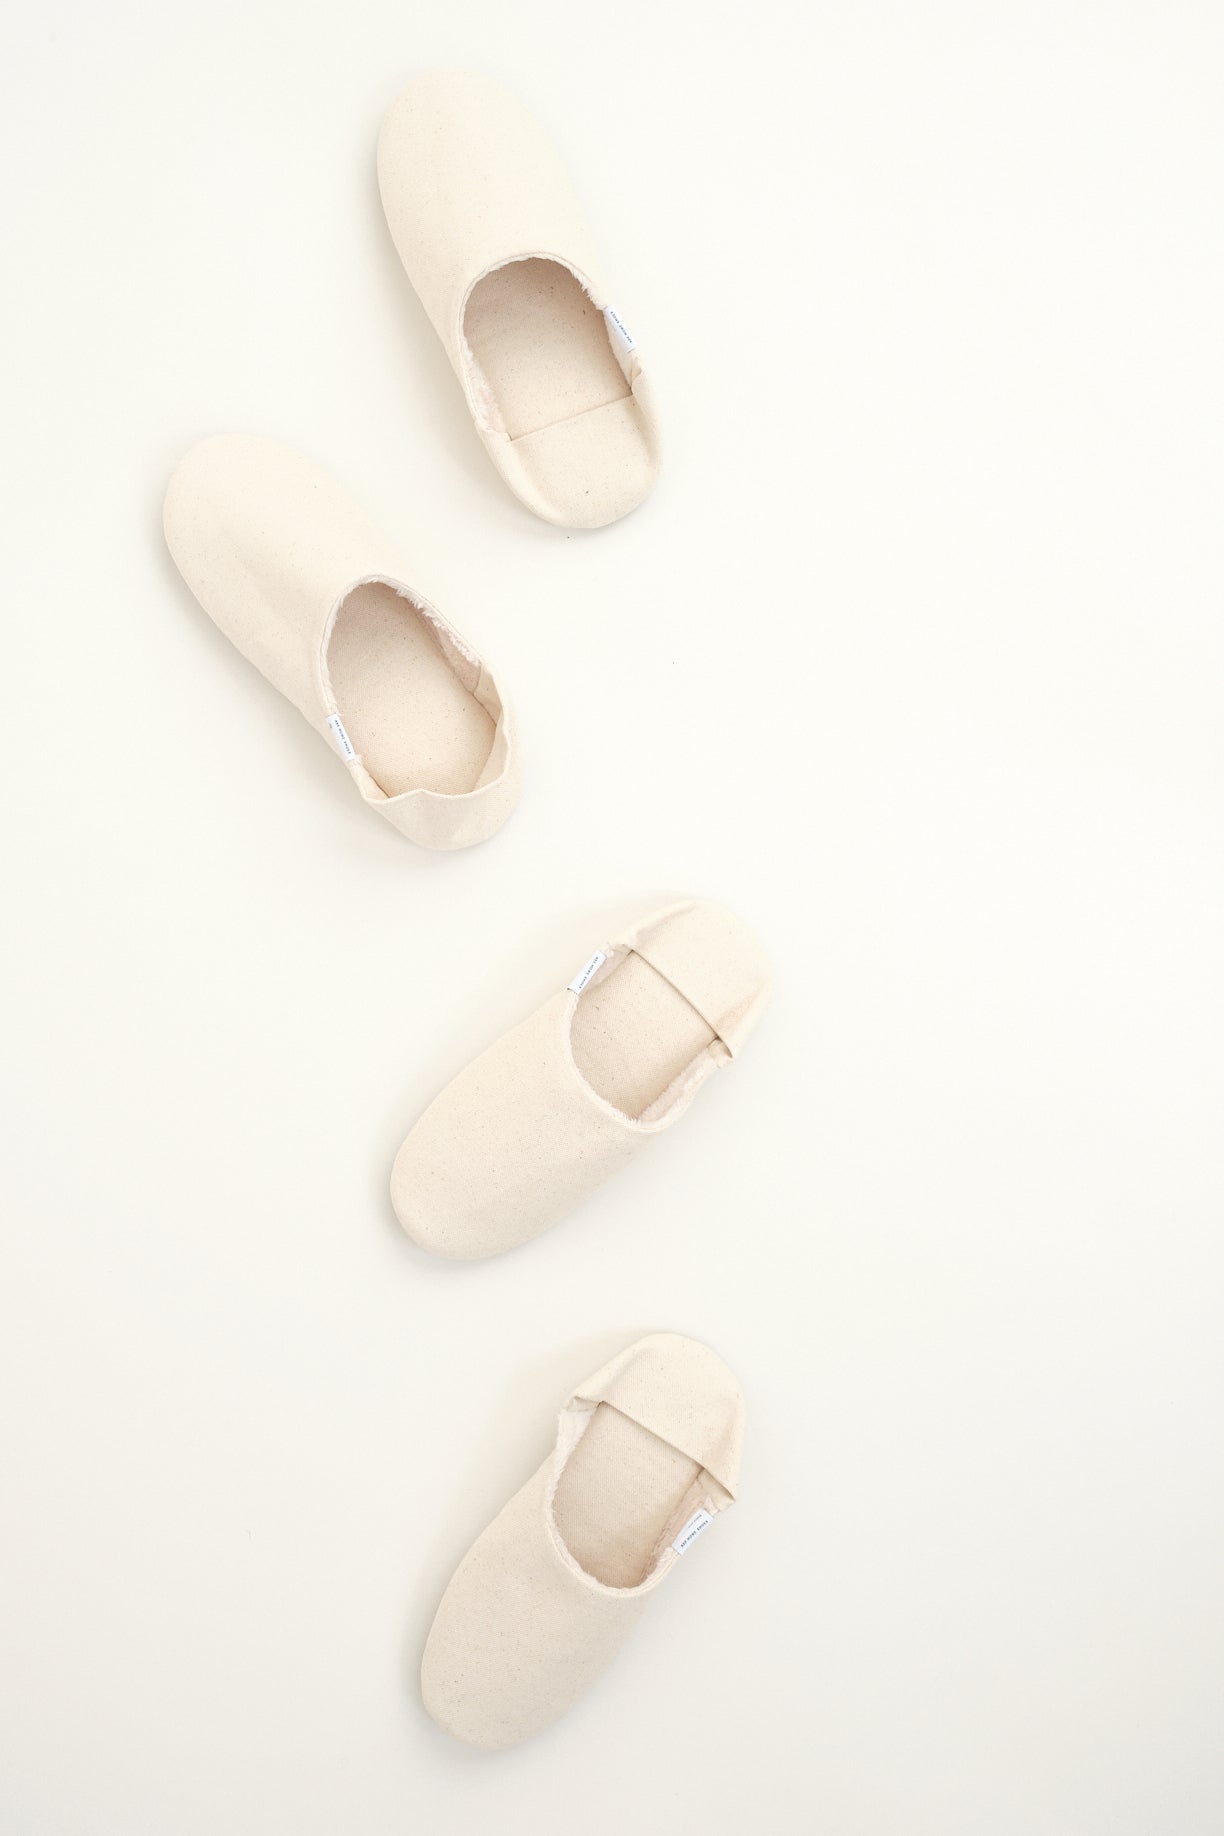 Moku Linen Room Shoes in Natural